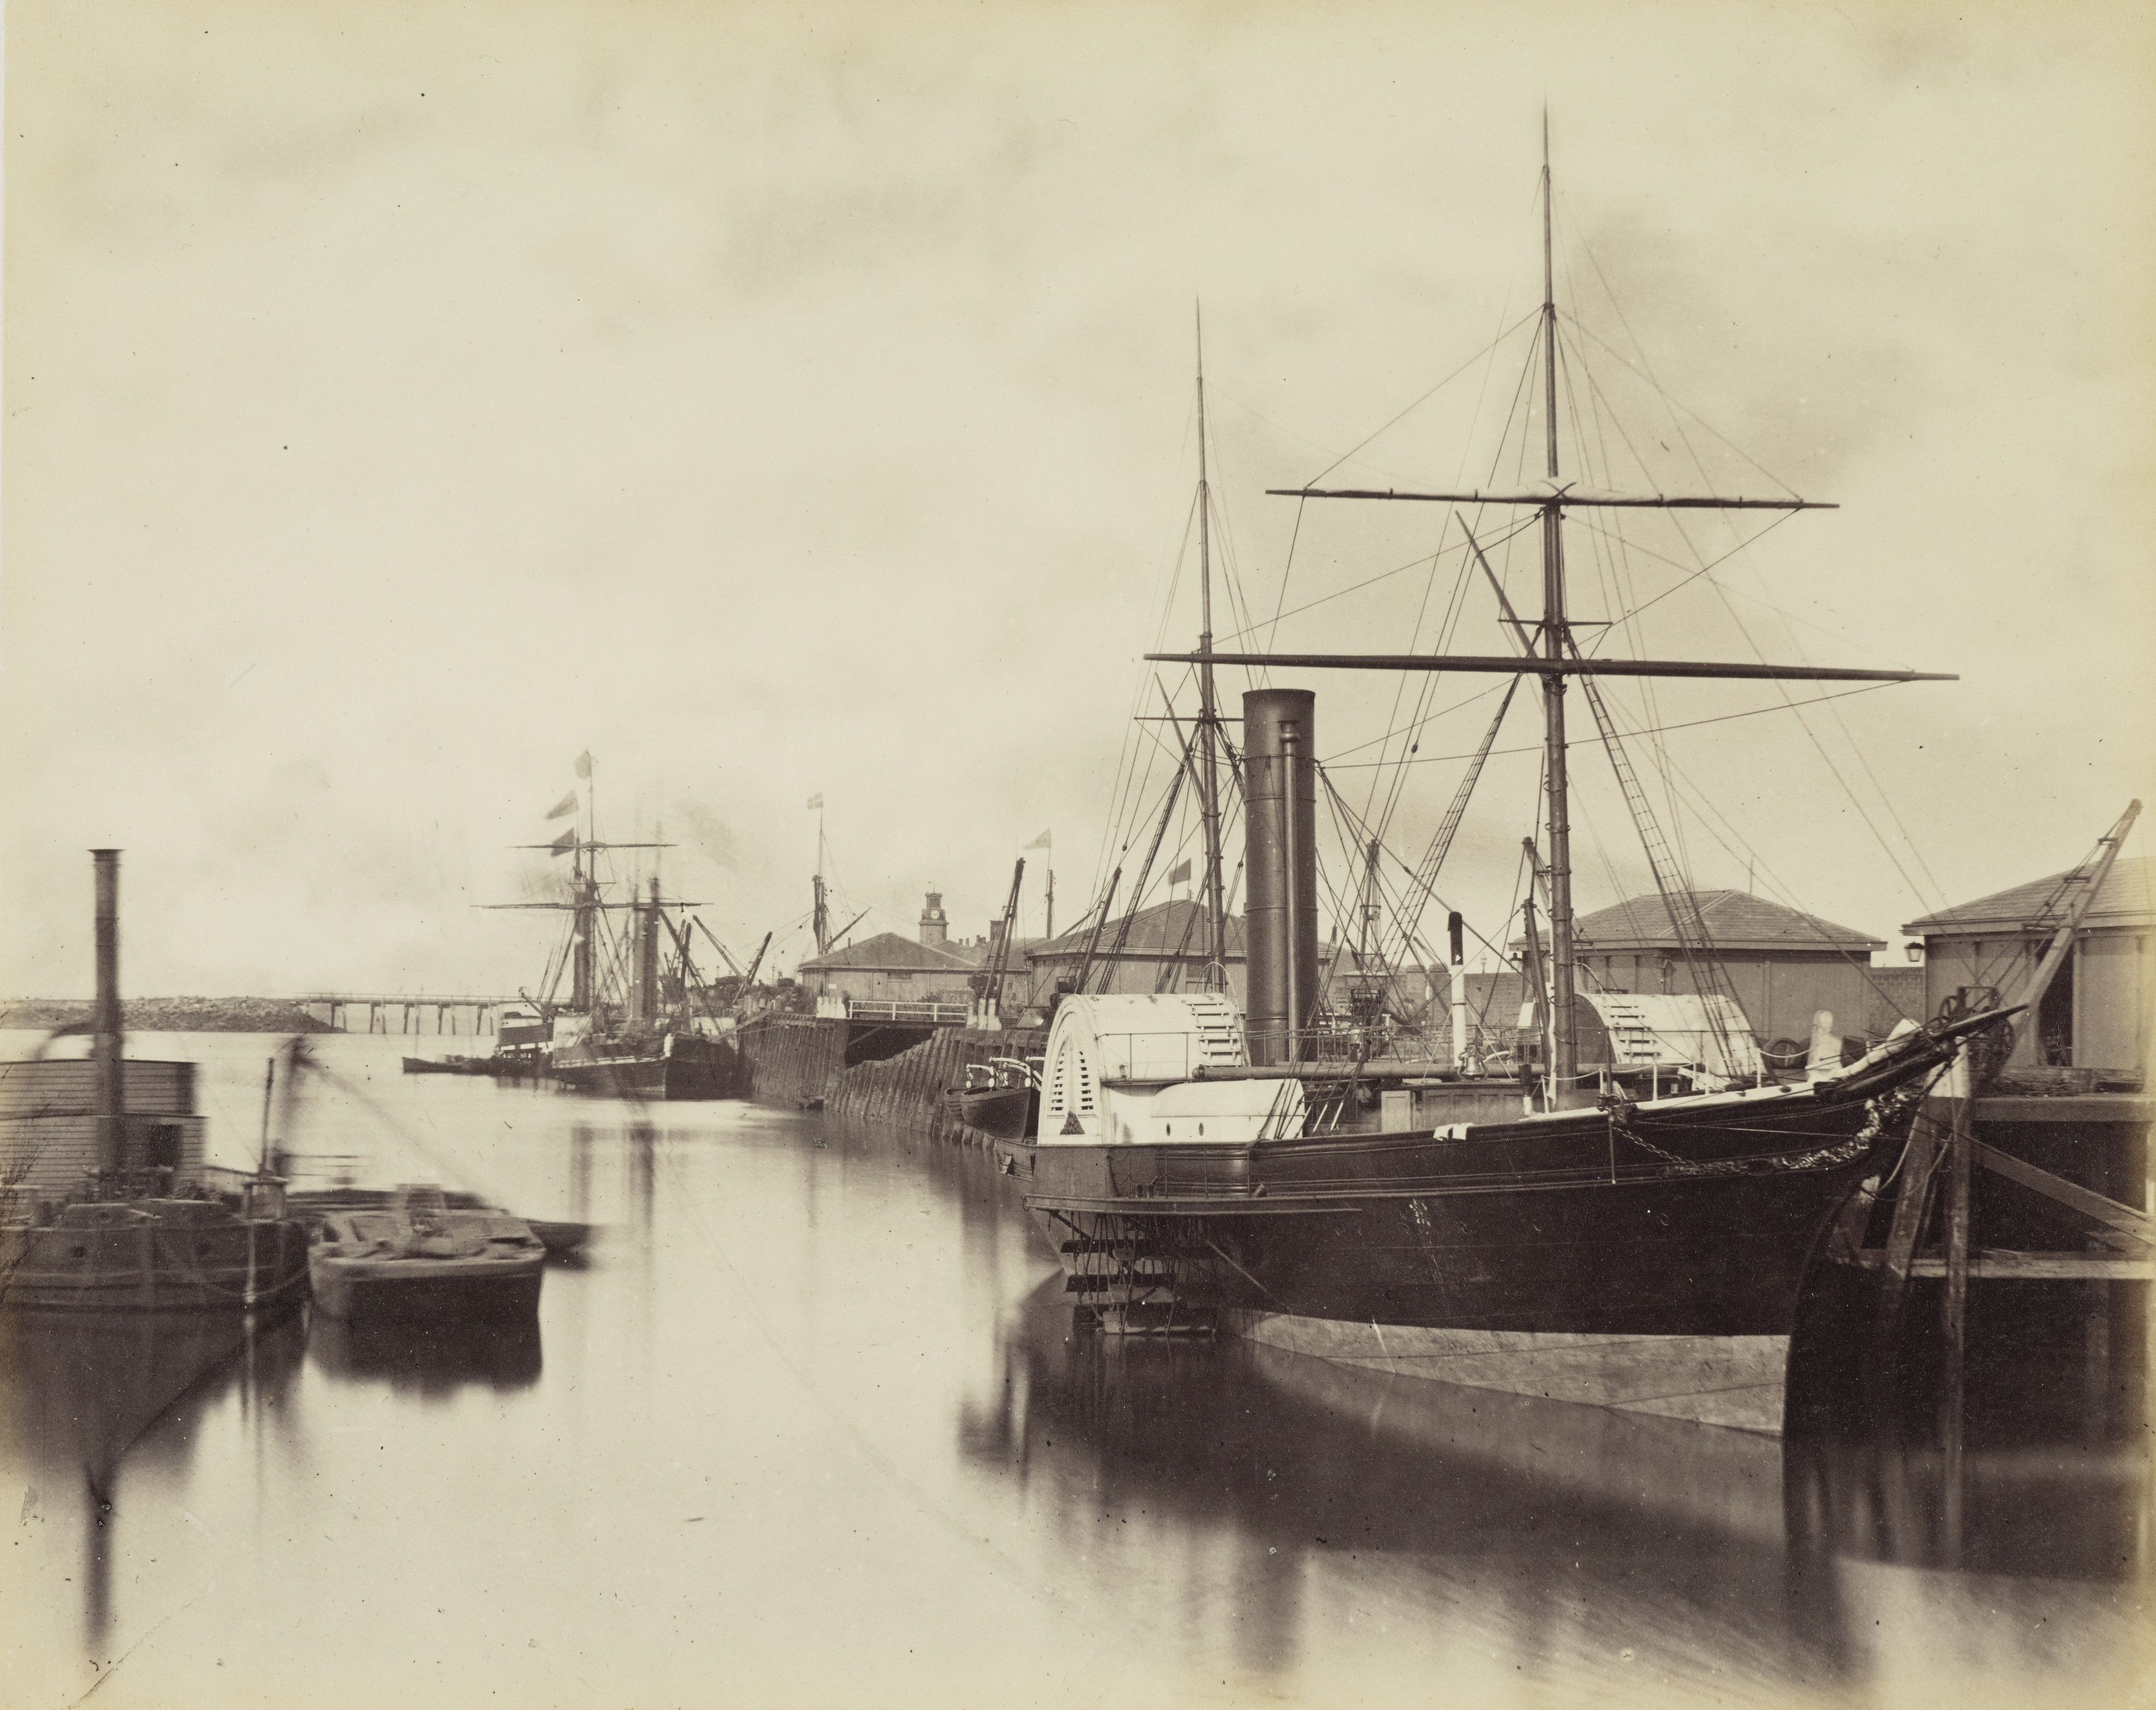 Ships in Granton Harbour near Edinburgh (National Library of Scotland/National Galleries of Scotland/PA)